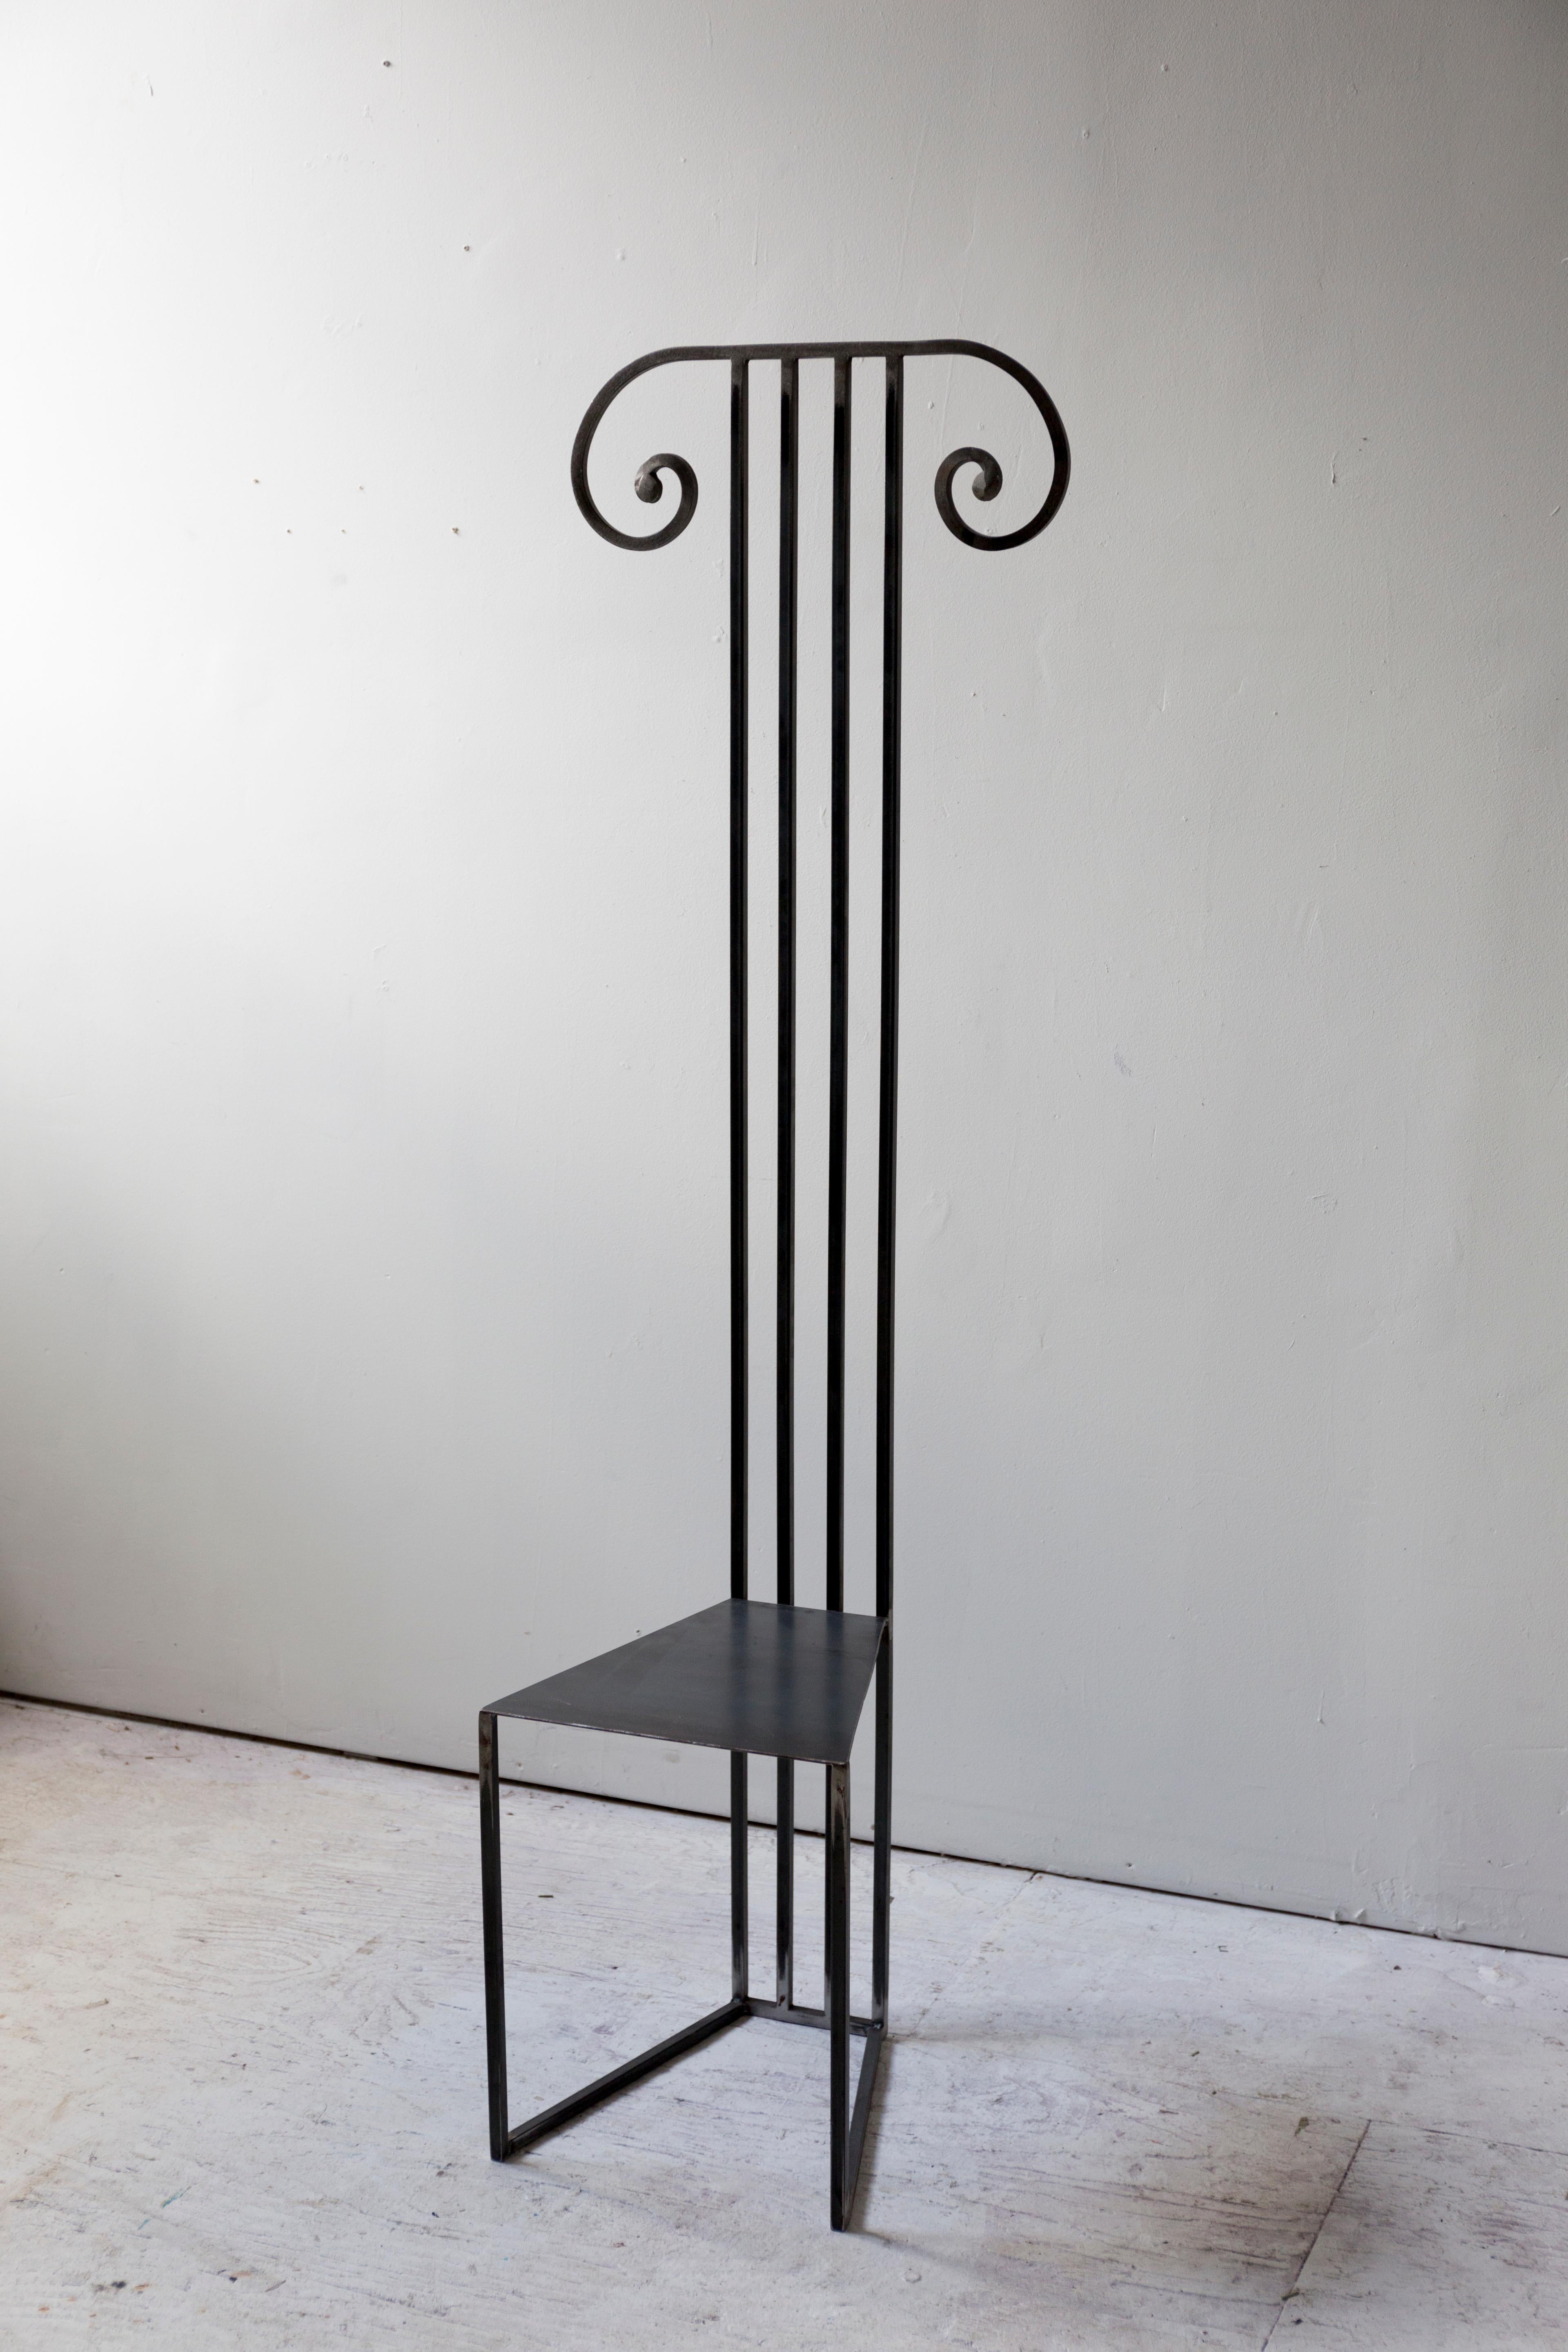 The Column Chair brings a striking architectural silhouette to any space. Solid steel rods transition into scrolls at the top of the chair, evoking classic ionic columns. The flared seat is comfortable while maintaining a pleasing sense of scale.